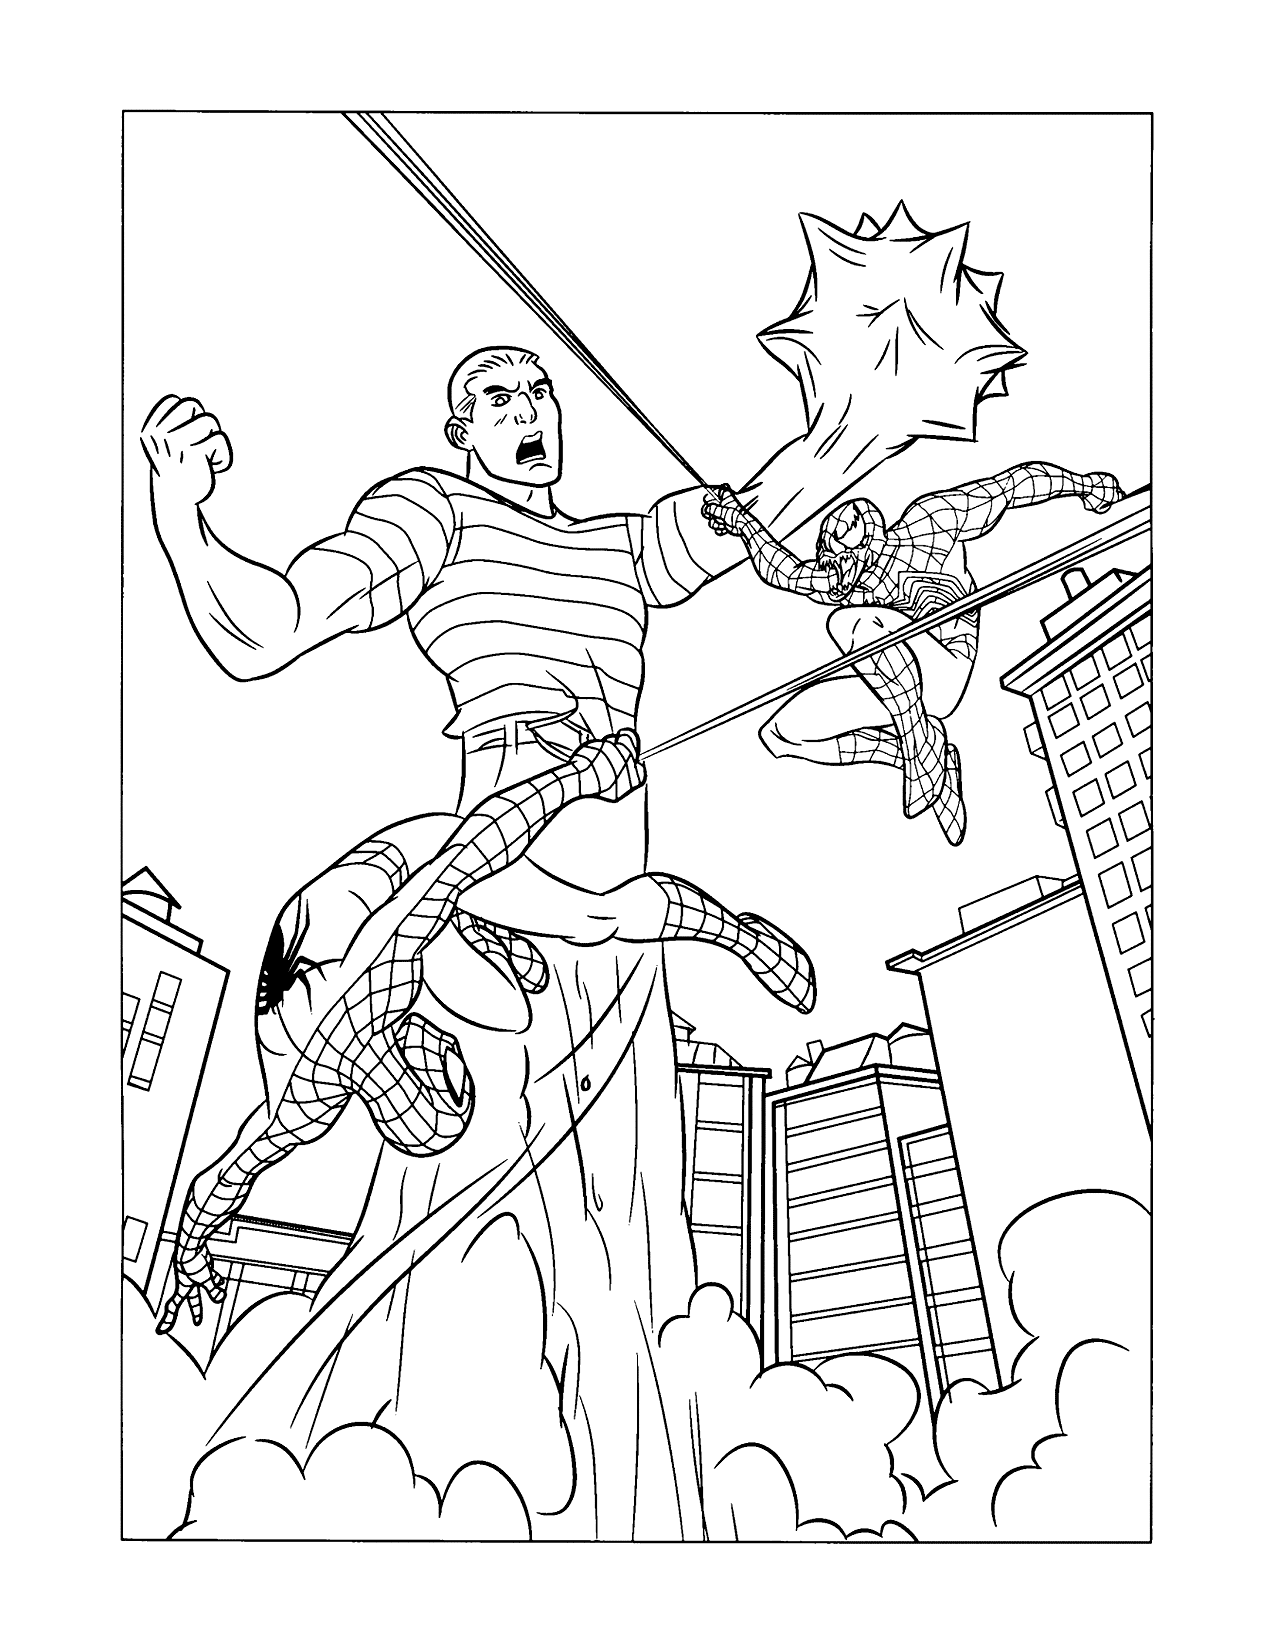 Spiderman Giddeon Mace And Venom Coloring Page